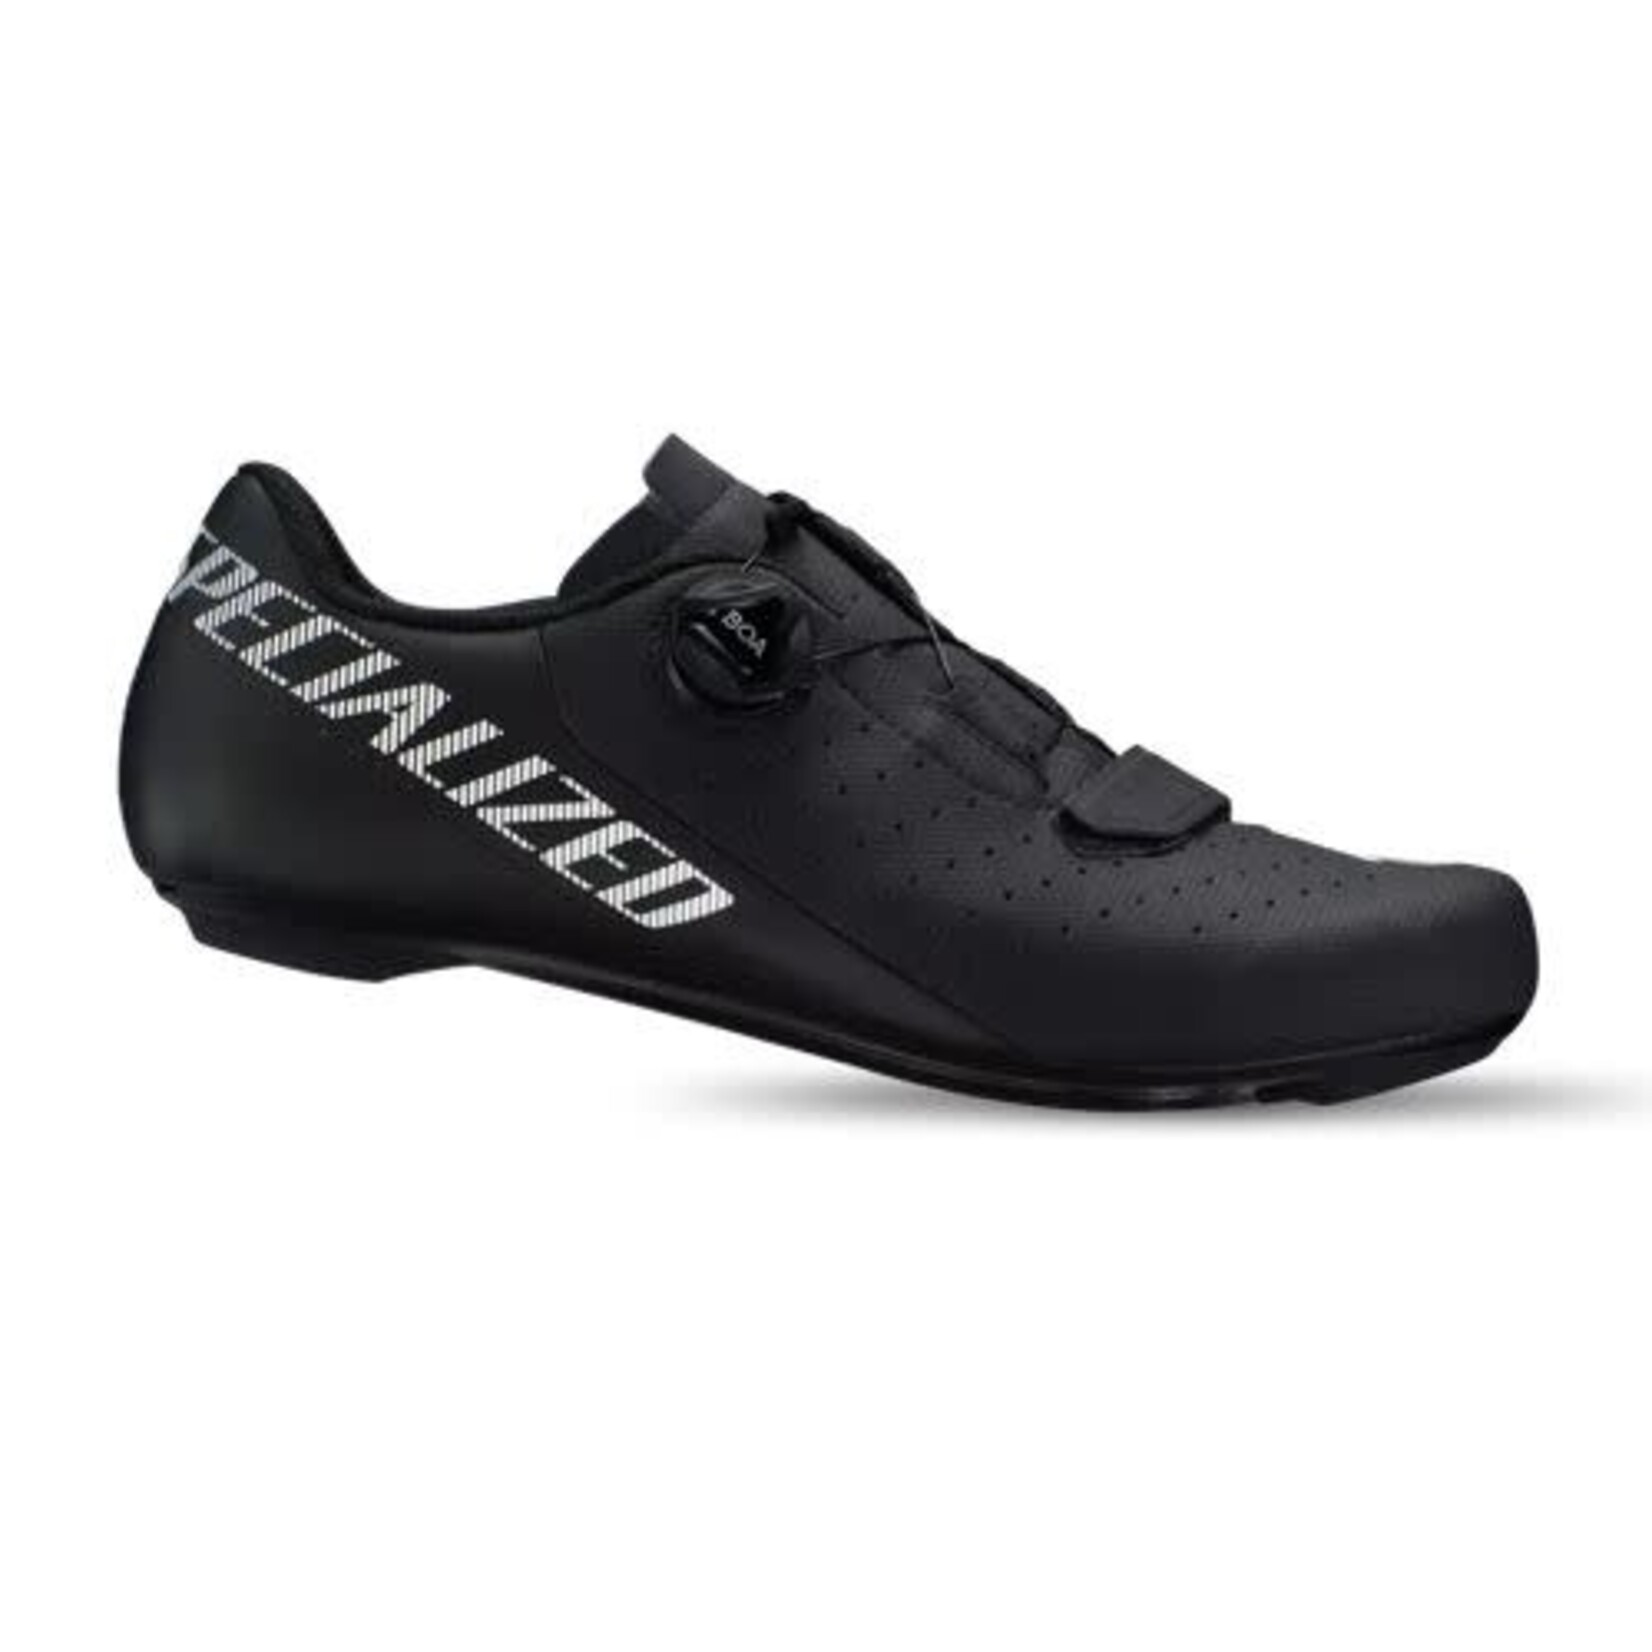 Specialized TORCH 1.0 RD SHOE BLACK 48